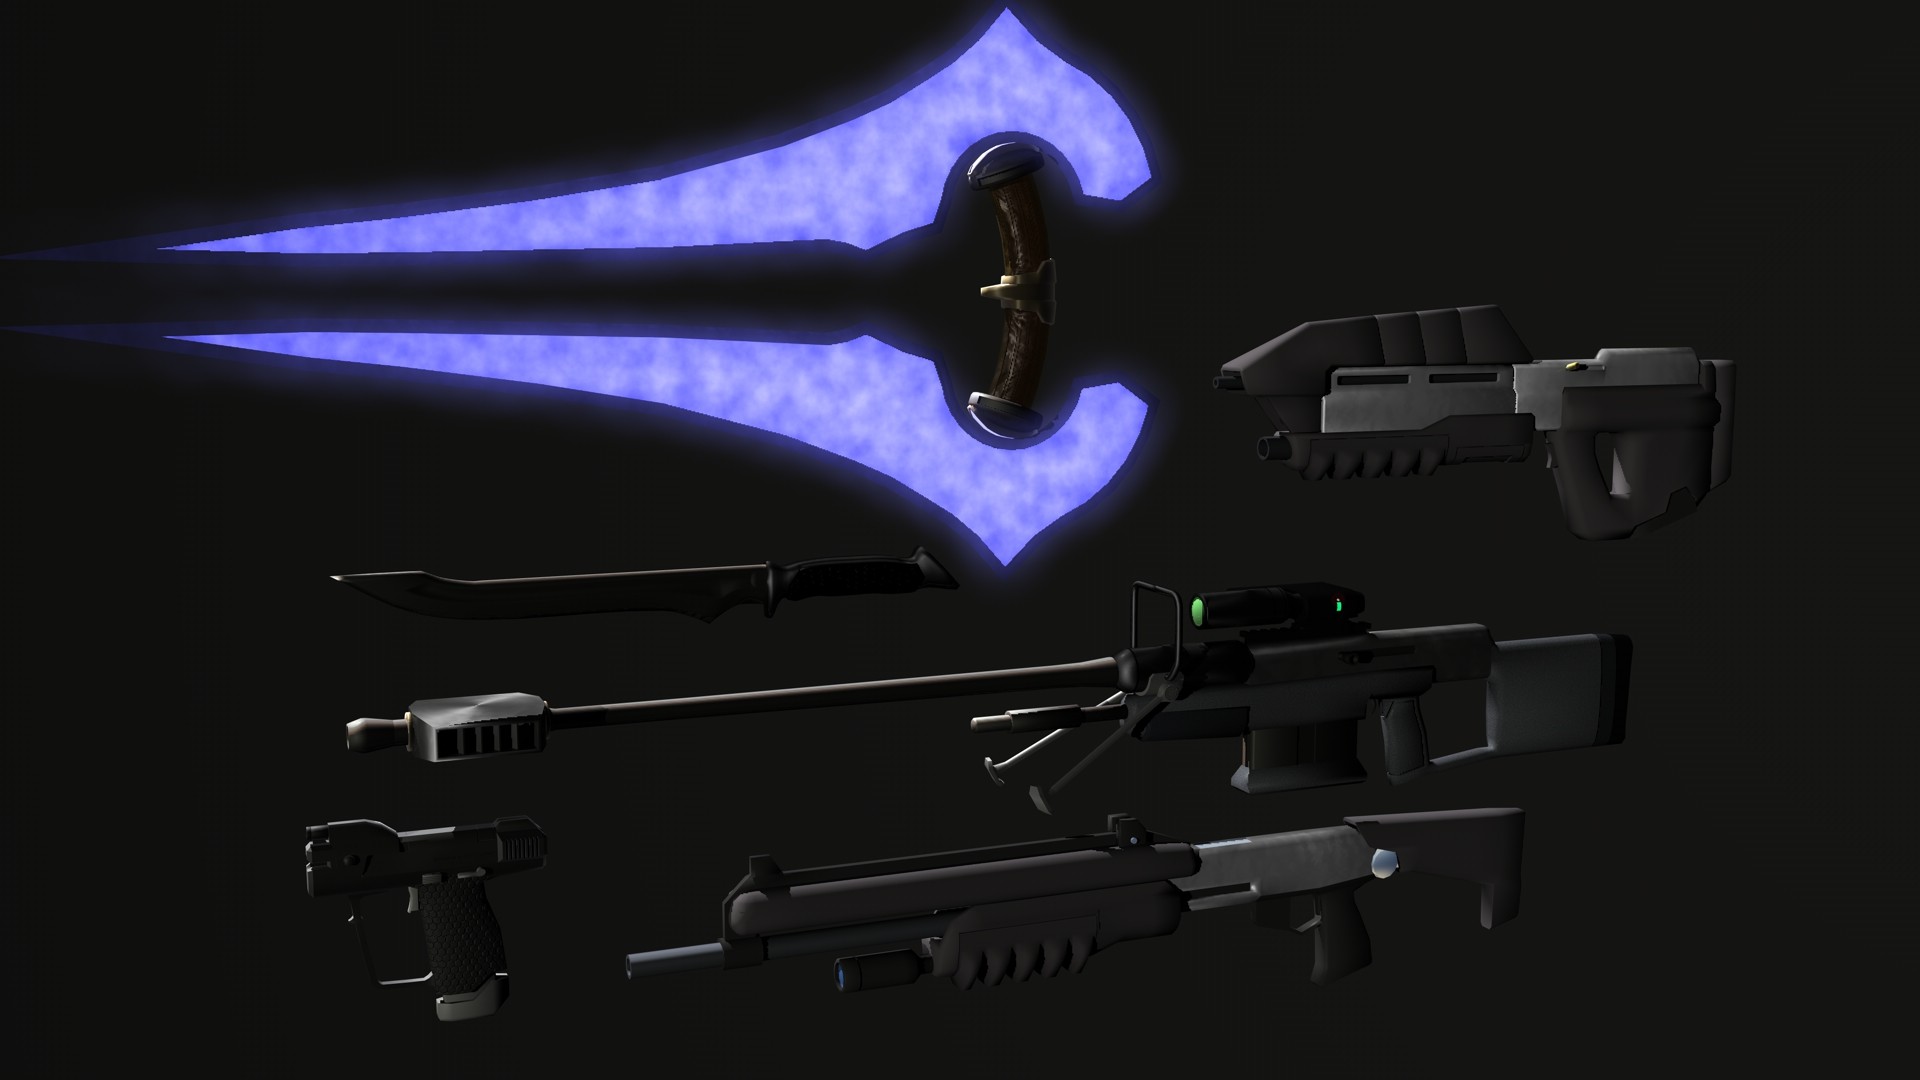 halo combat evolved weapons